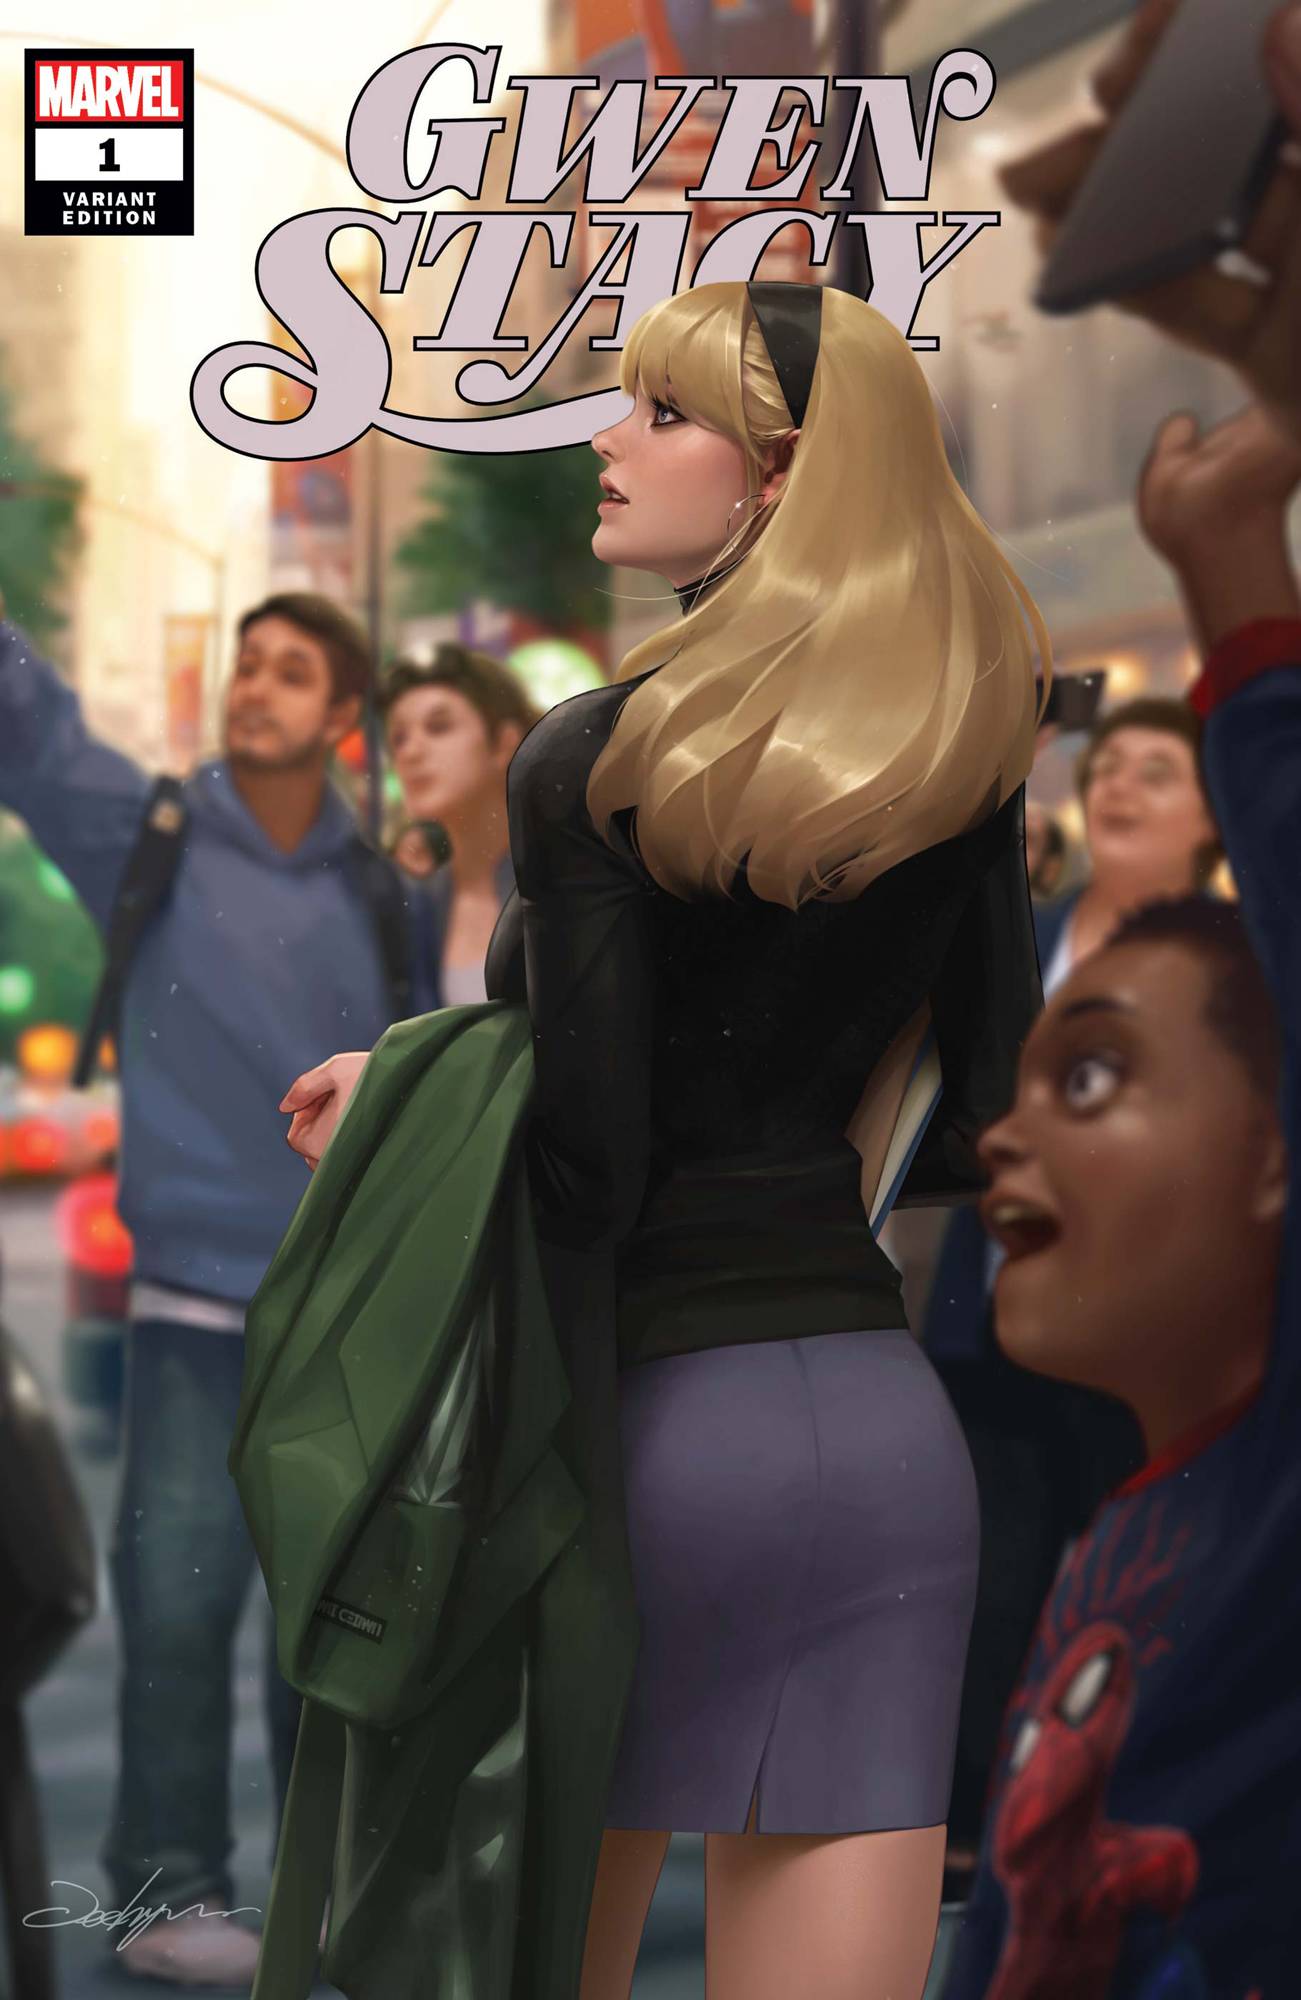 GWEN STACY #1 (OF 5) JEEHYUNG LEE VAR